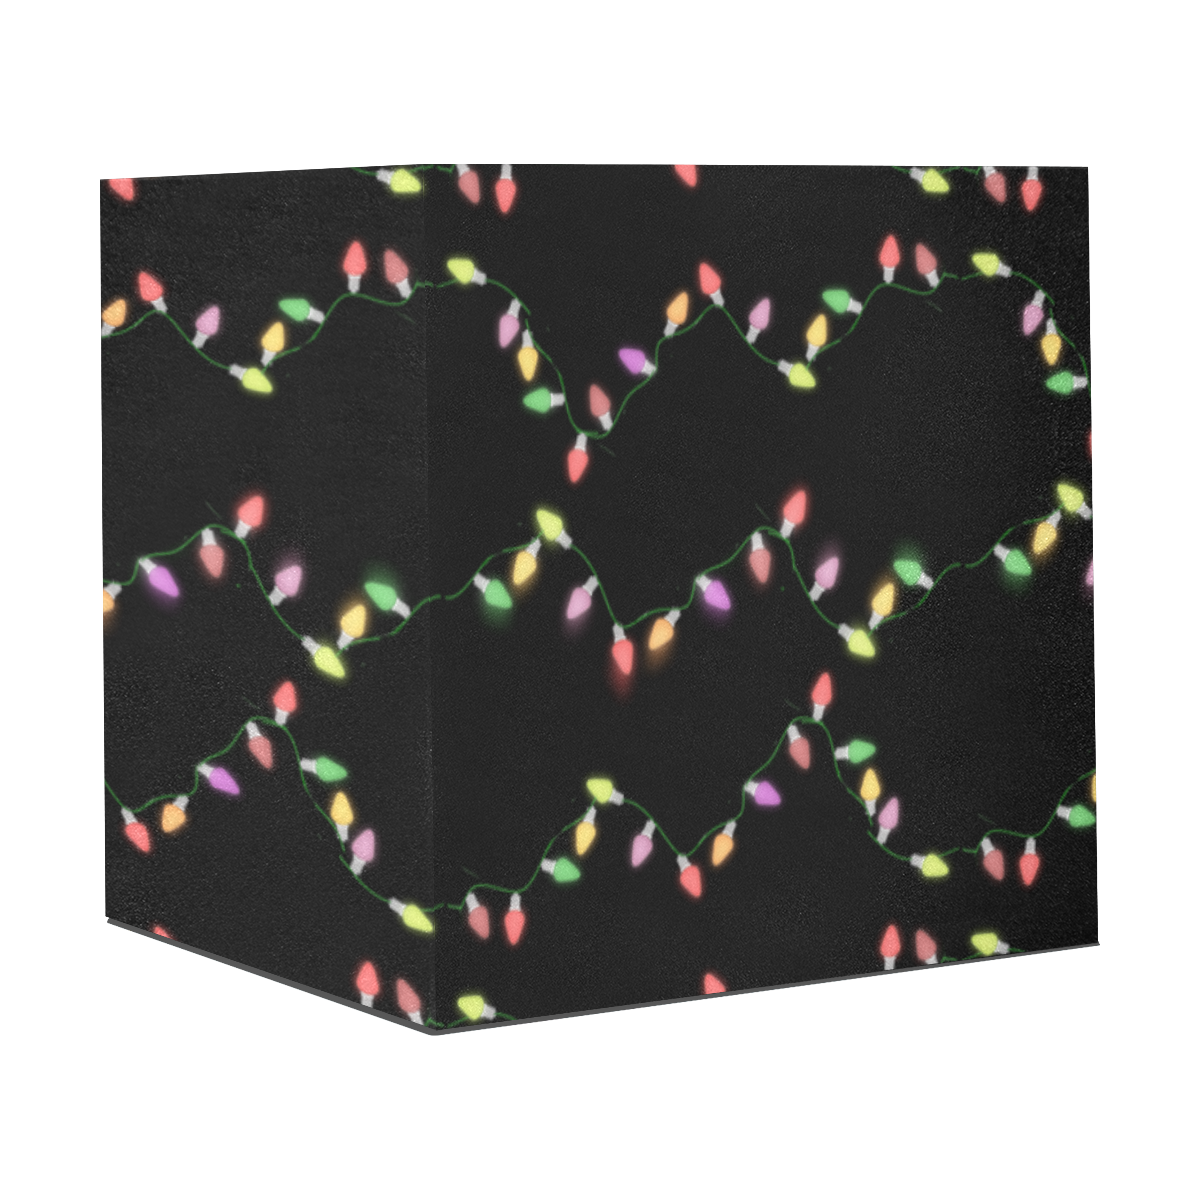 Festive Christmas Lights on Black Gift Wrapping Paper 58"x 23" (2 Rolls)